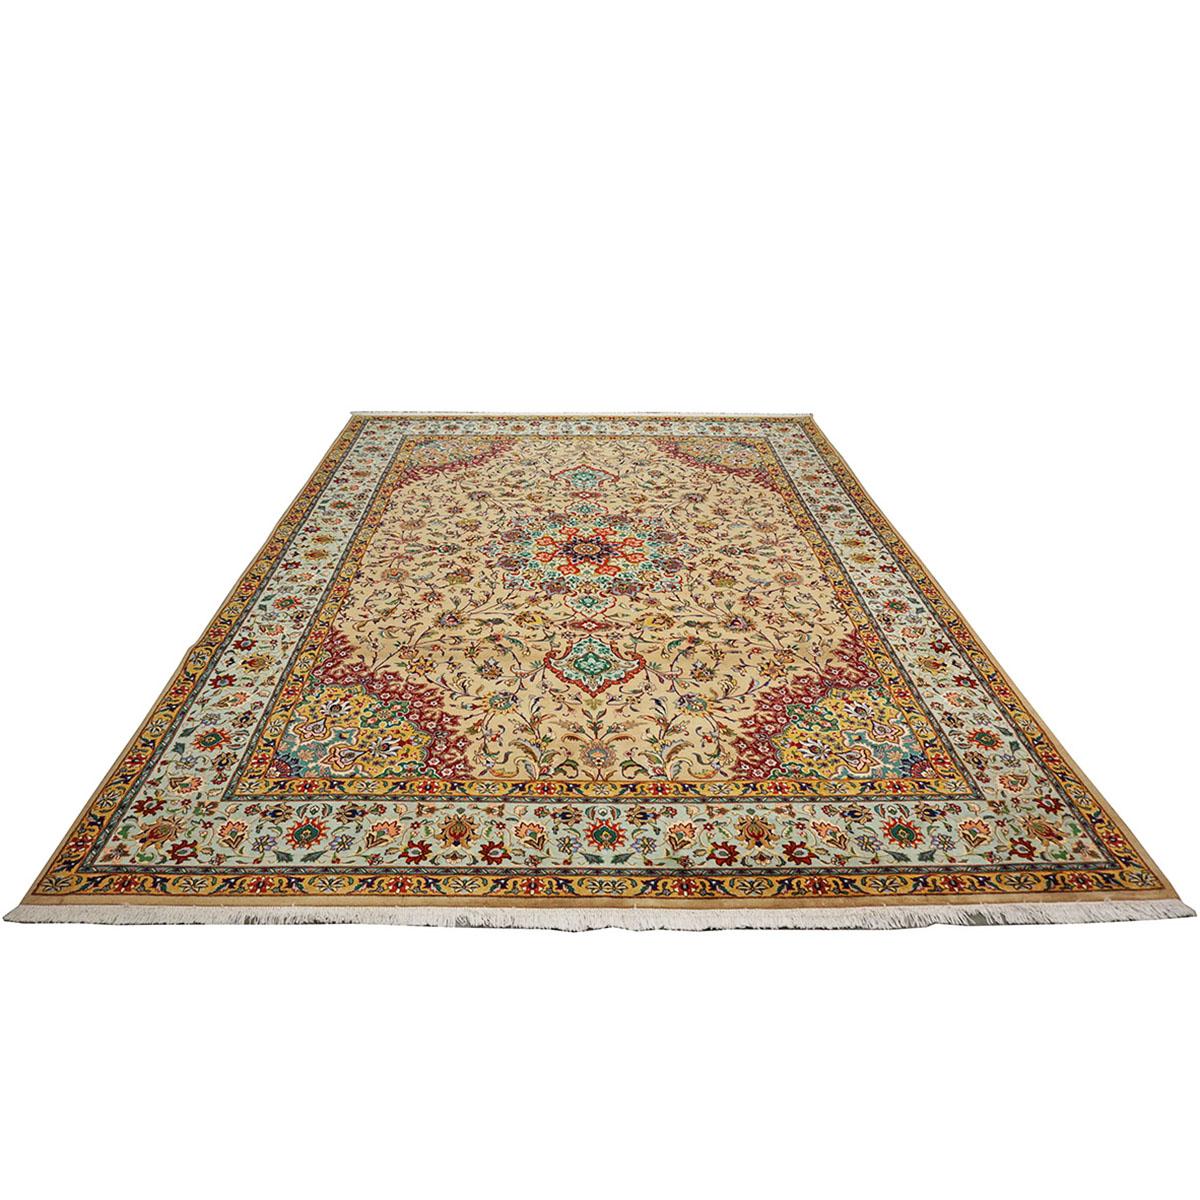 Ashly fine rugs presents a 1940s Antique Persian Tabriz. Tabriz is a northern city in modern-day Iran and has forever been famous for the fineness and craftsmanship of its handmade rugs. This piece has a light sand-colored background, with the